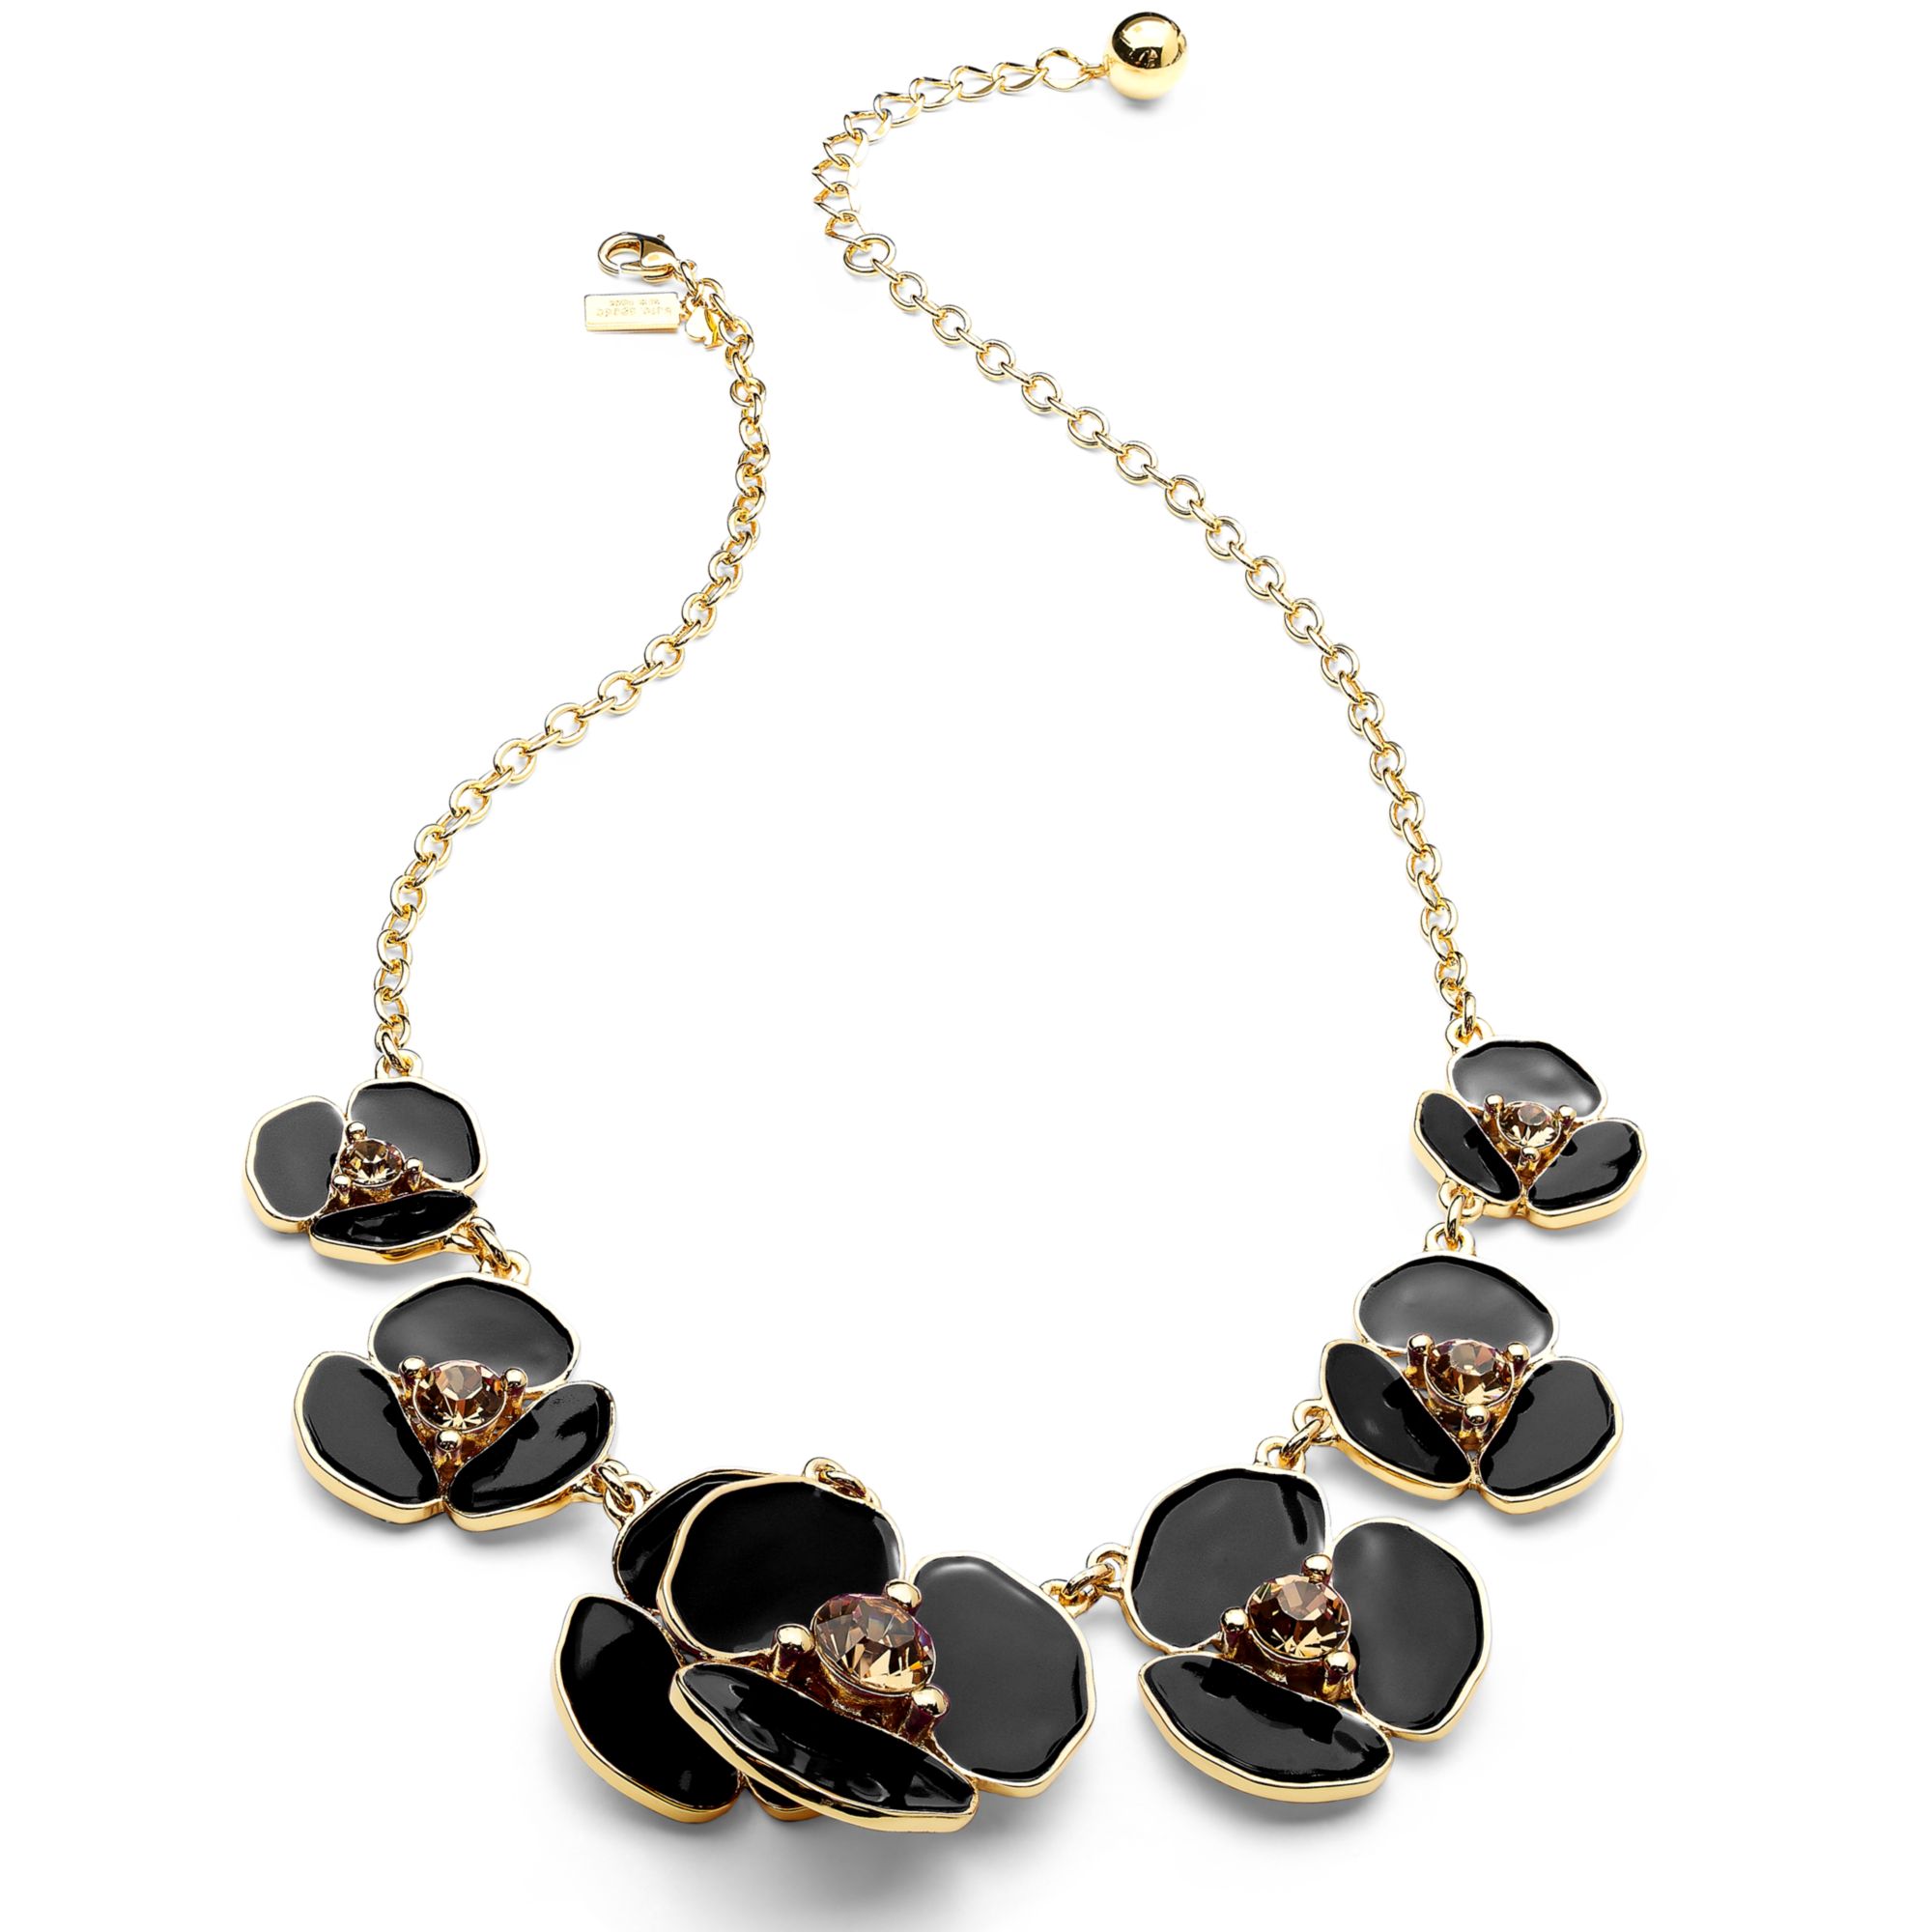 Kate Spade New York Necklace 12k Gold Plated Disco Pansy Black